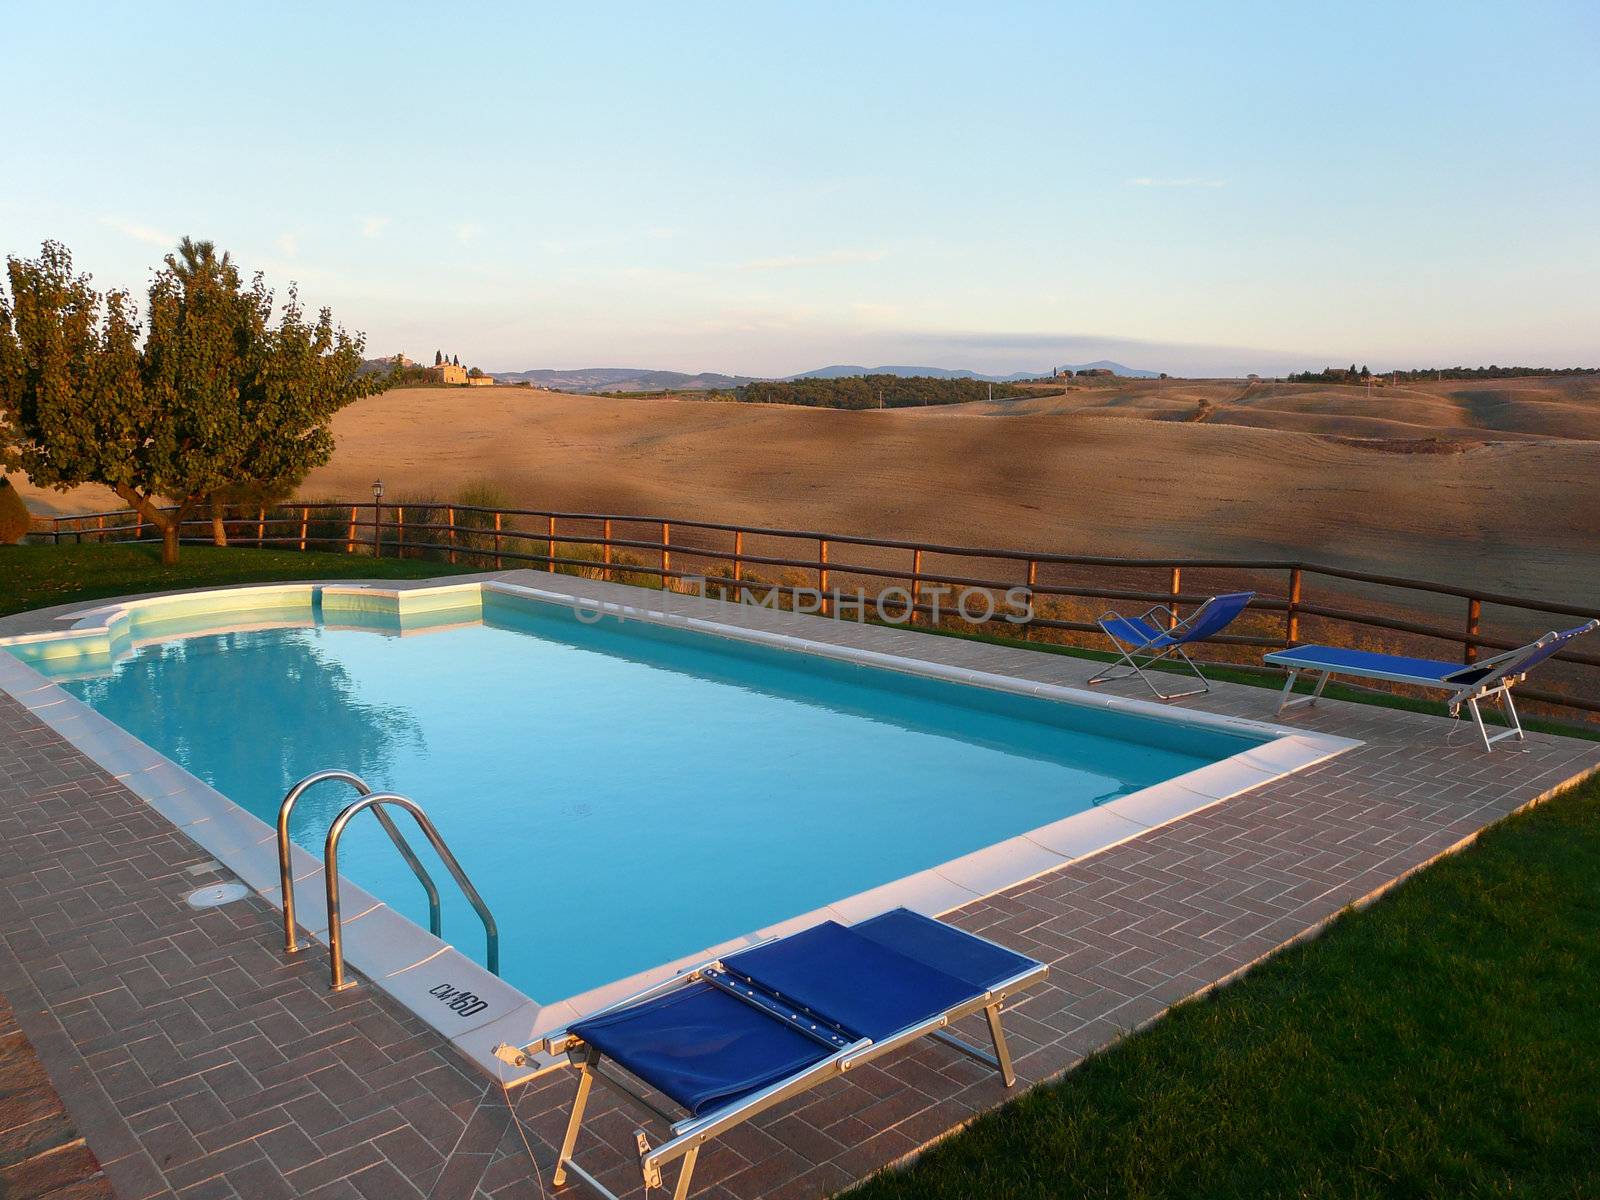 Pool at a holiday villa in the typical rolling hills of the Val d'Orcia in Tuscany, Italy.